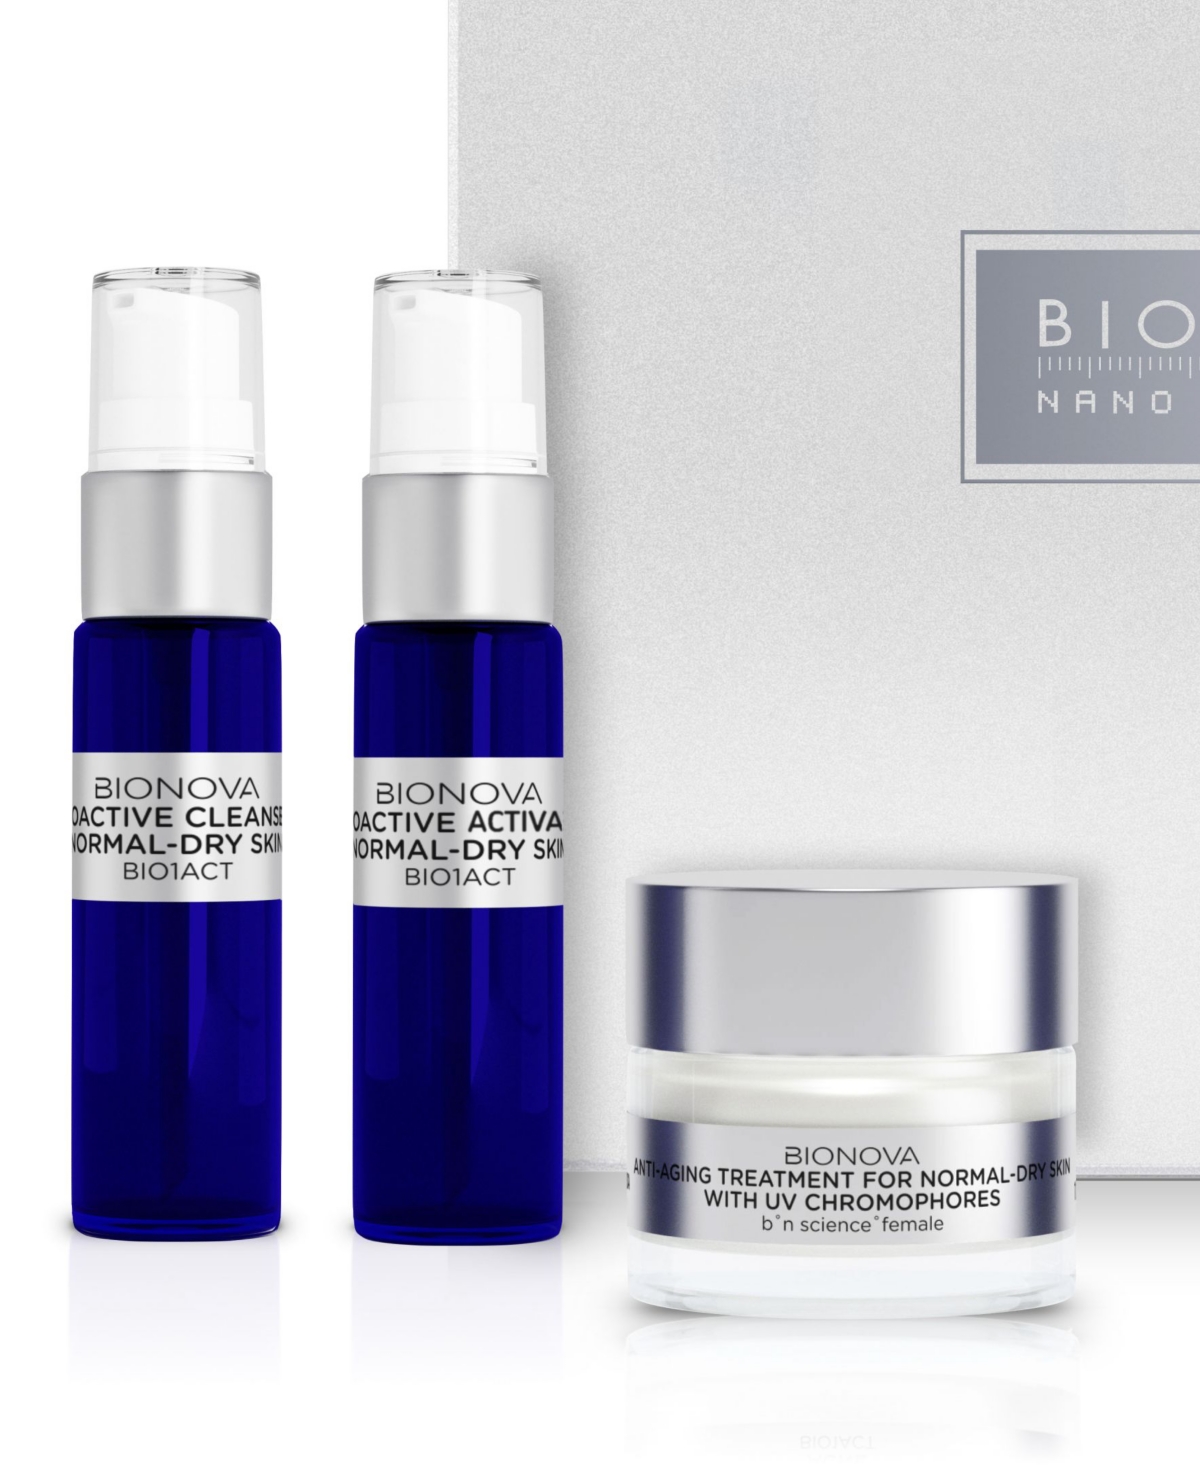 Bionova Anti-Aging Discovery Collection for Normal/Dry Skin with Uv Chromophores